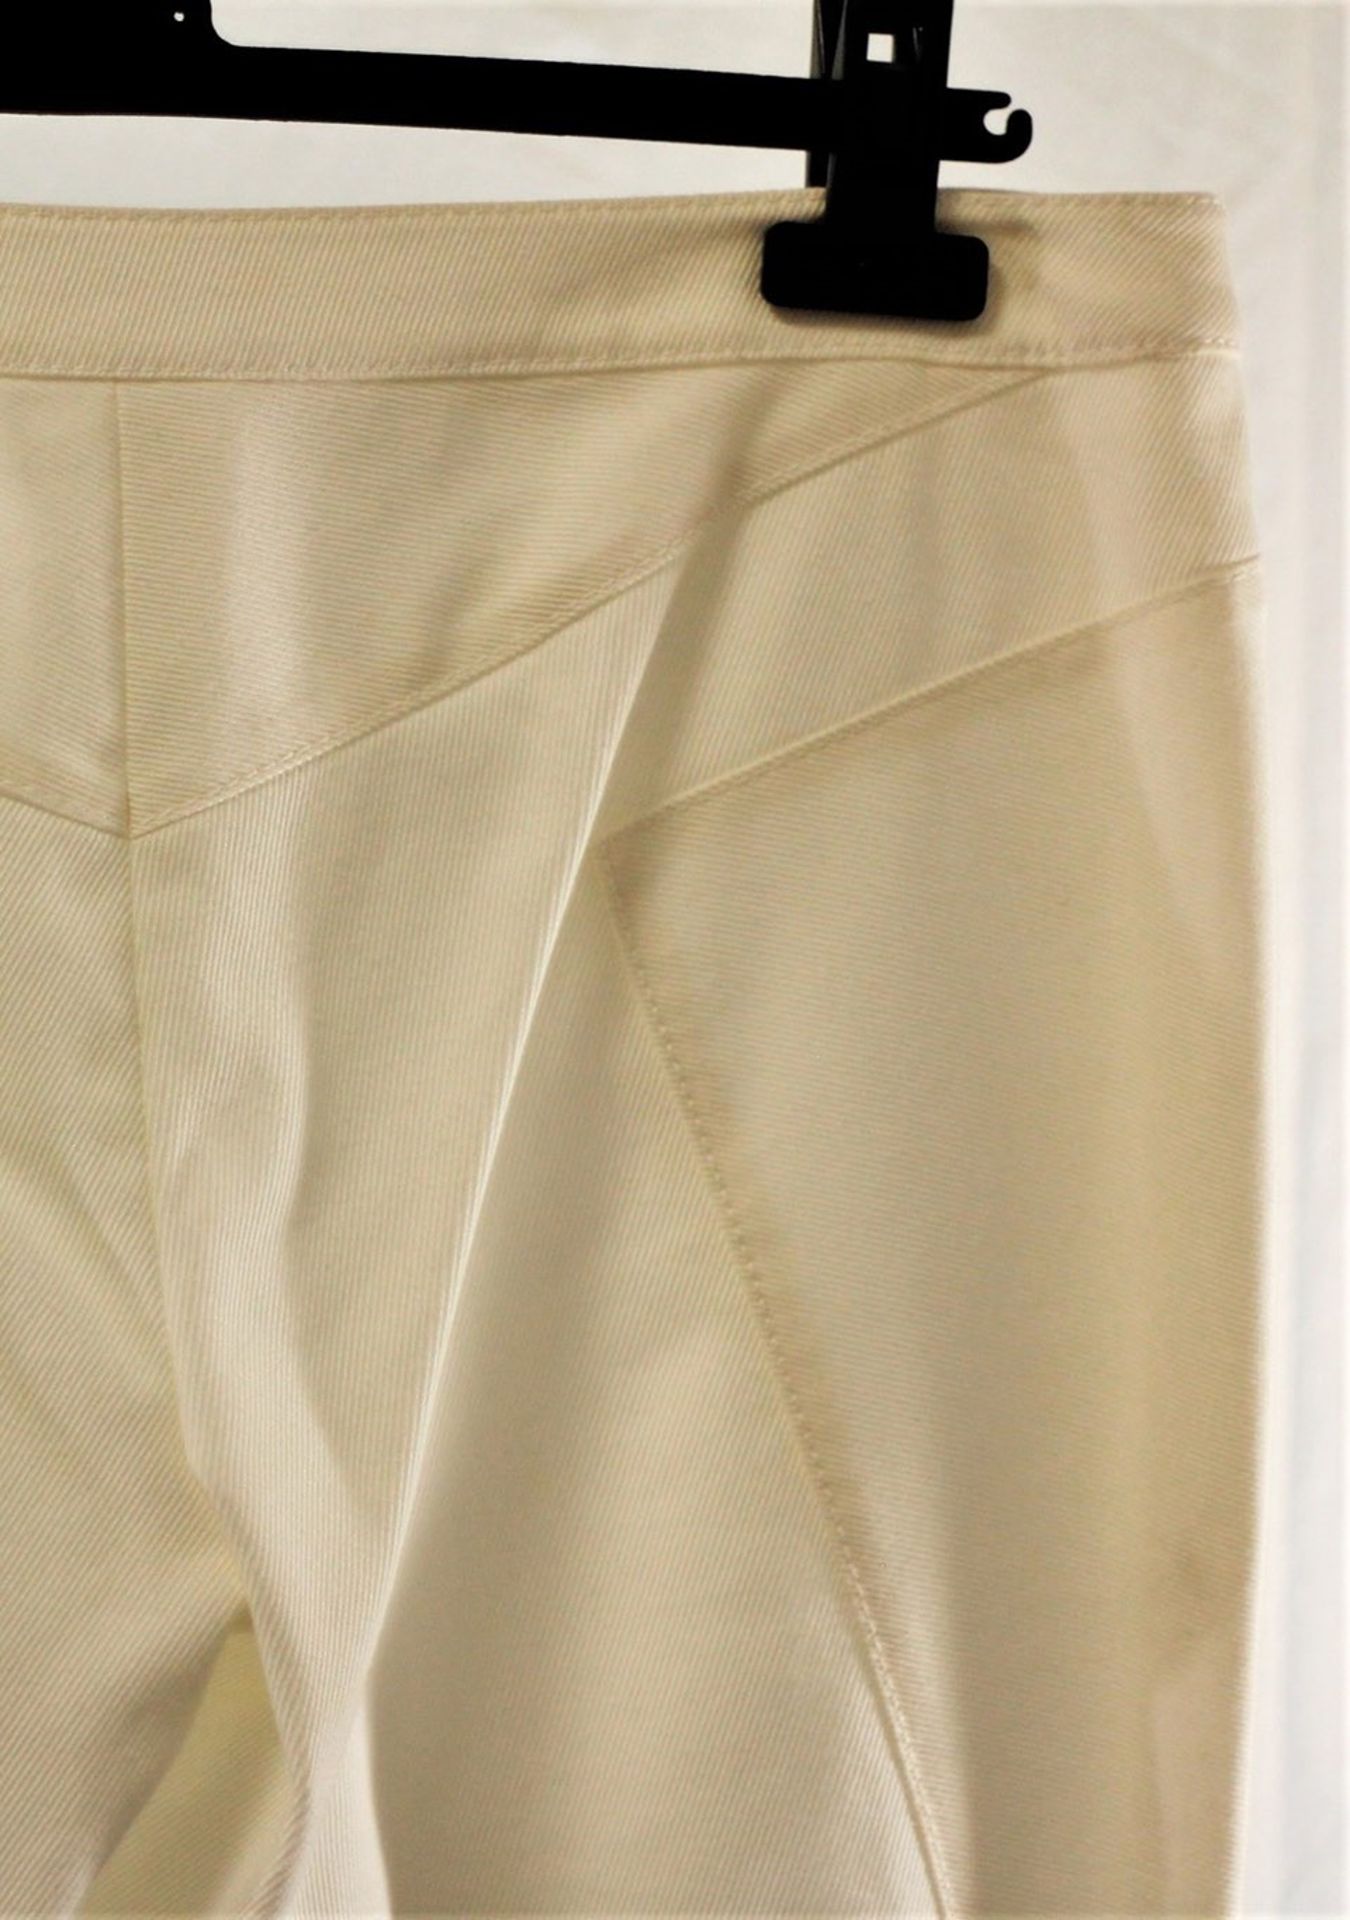 1 x Valentino Cream Trousers - Size: 10 - Material: 98% Cotton, 2% Elastane. Lining 100% Polyester - - Image 3 of 5